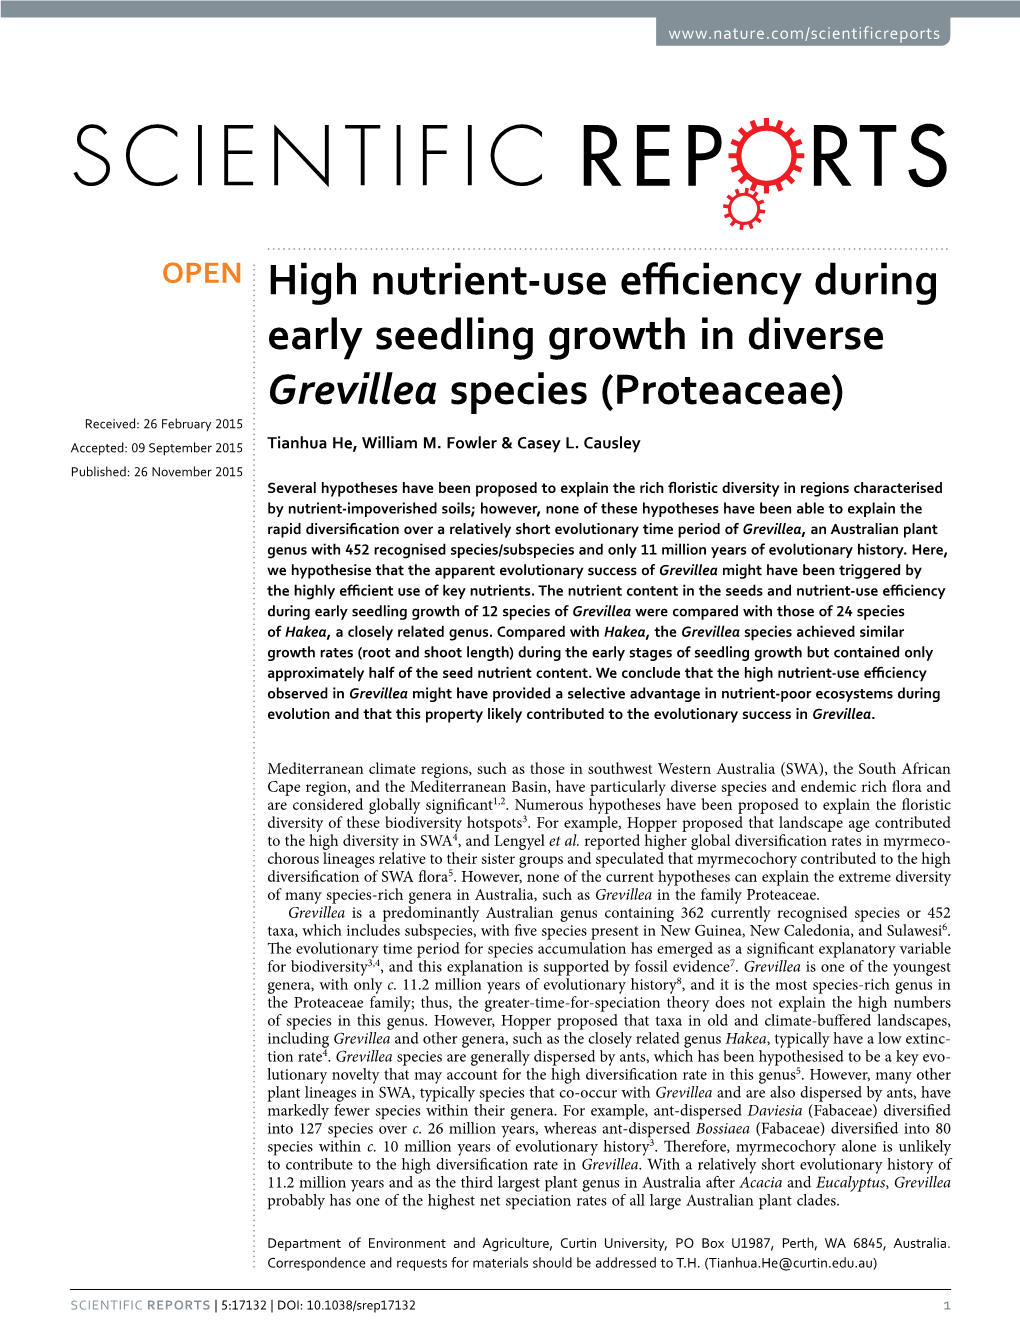 High Nutrient-Use Efficiency During Early Seedling Growth in Diverse